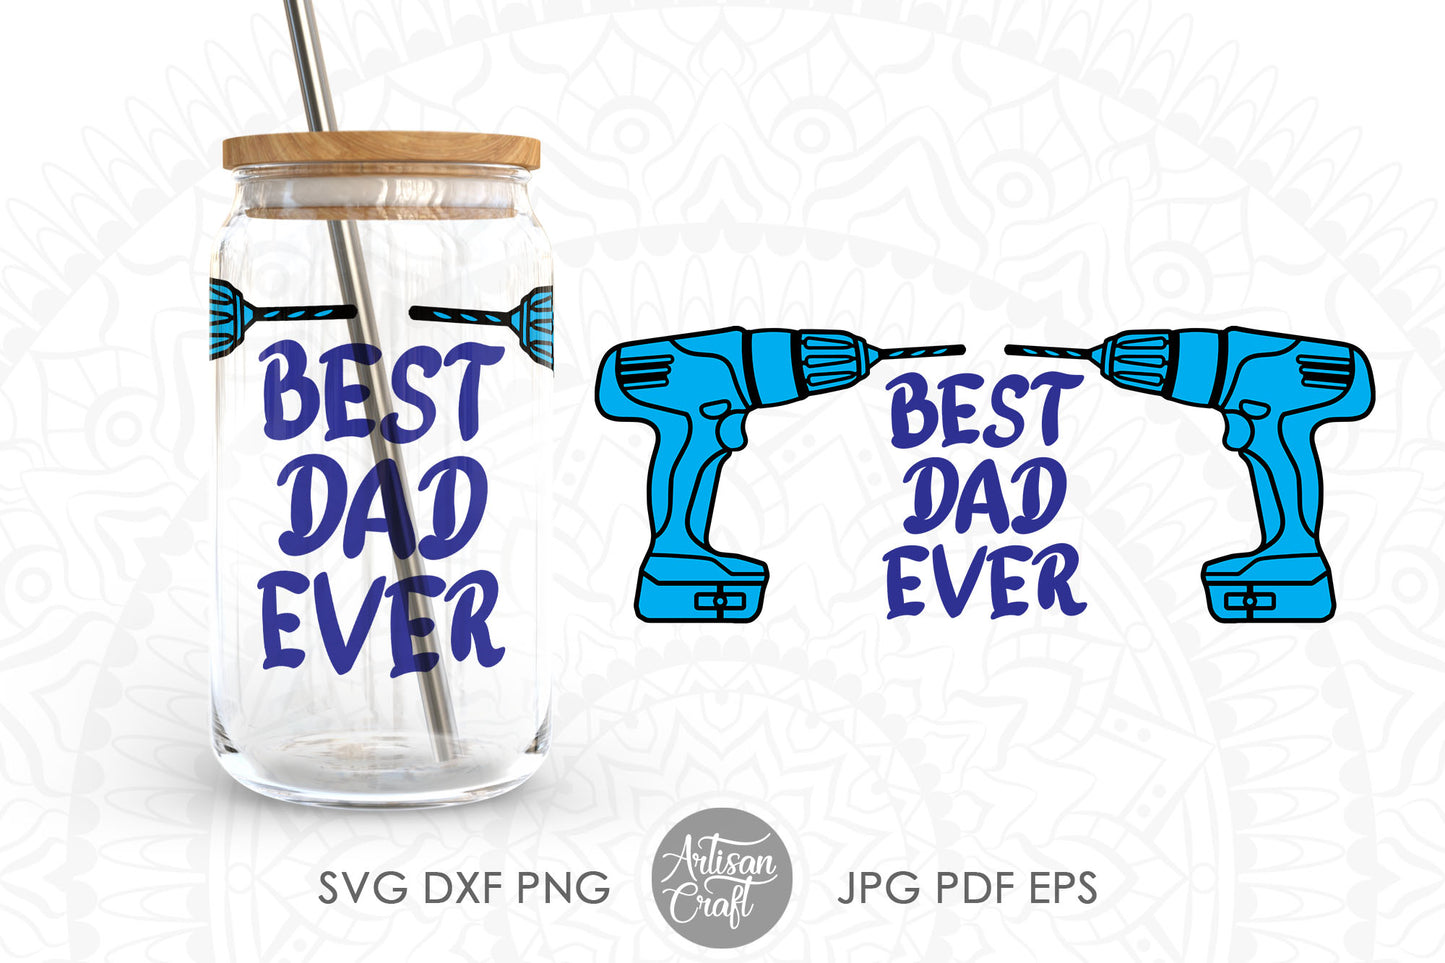 Can Glass SVG for fathers day with tools